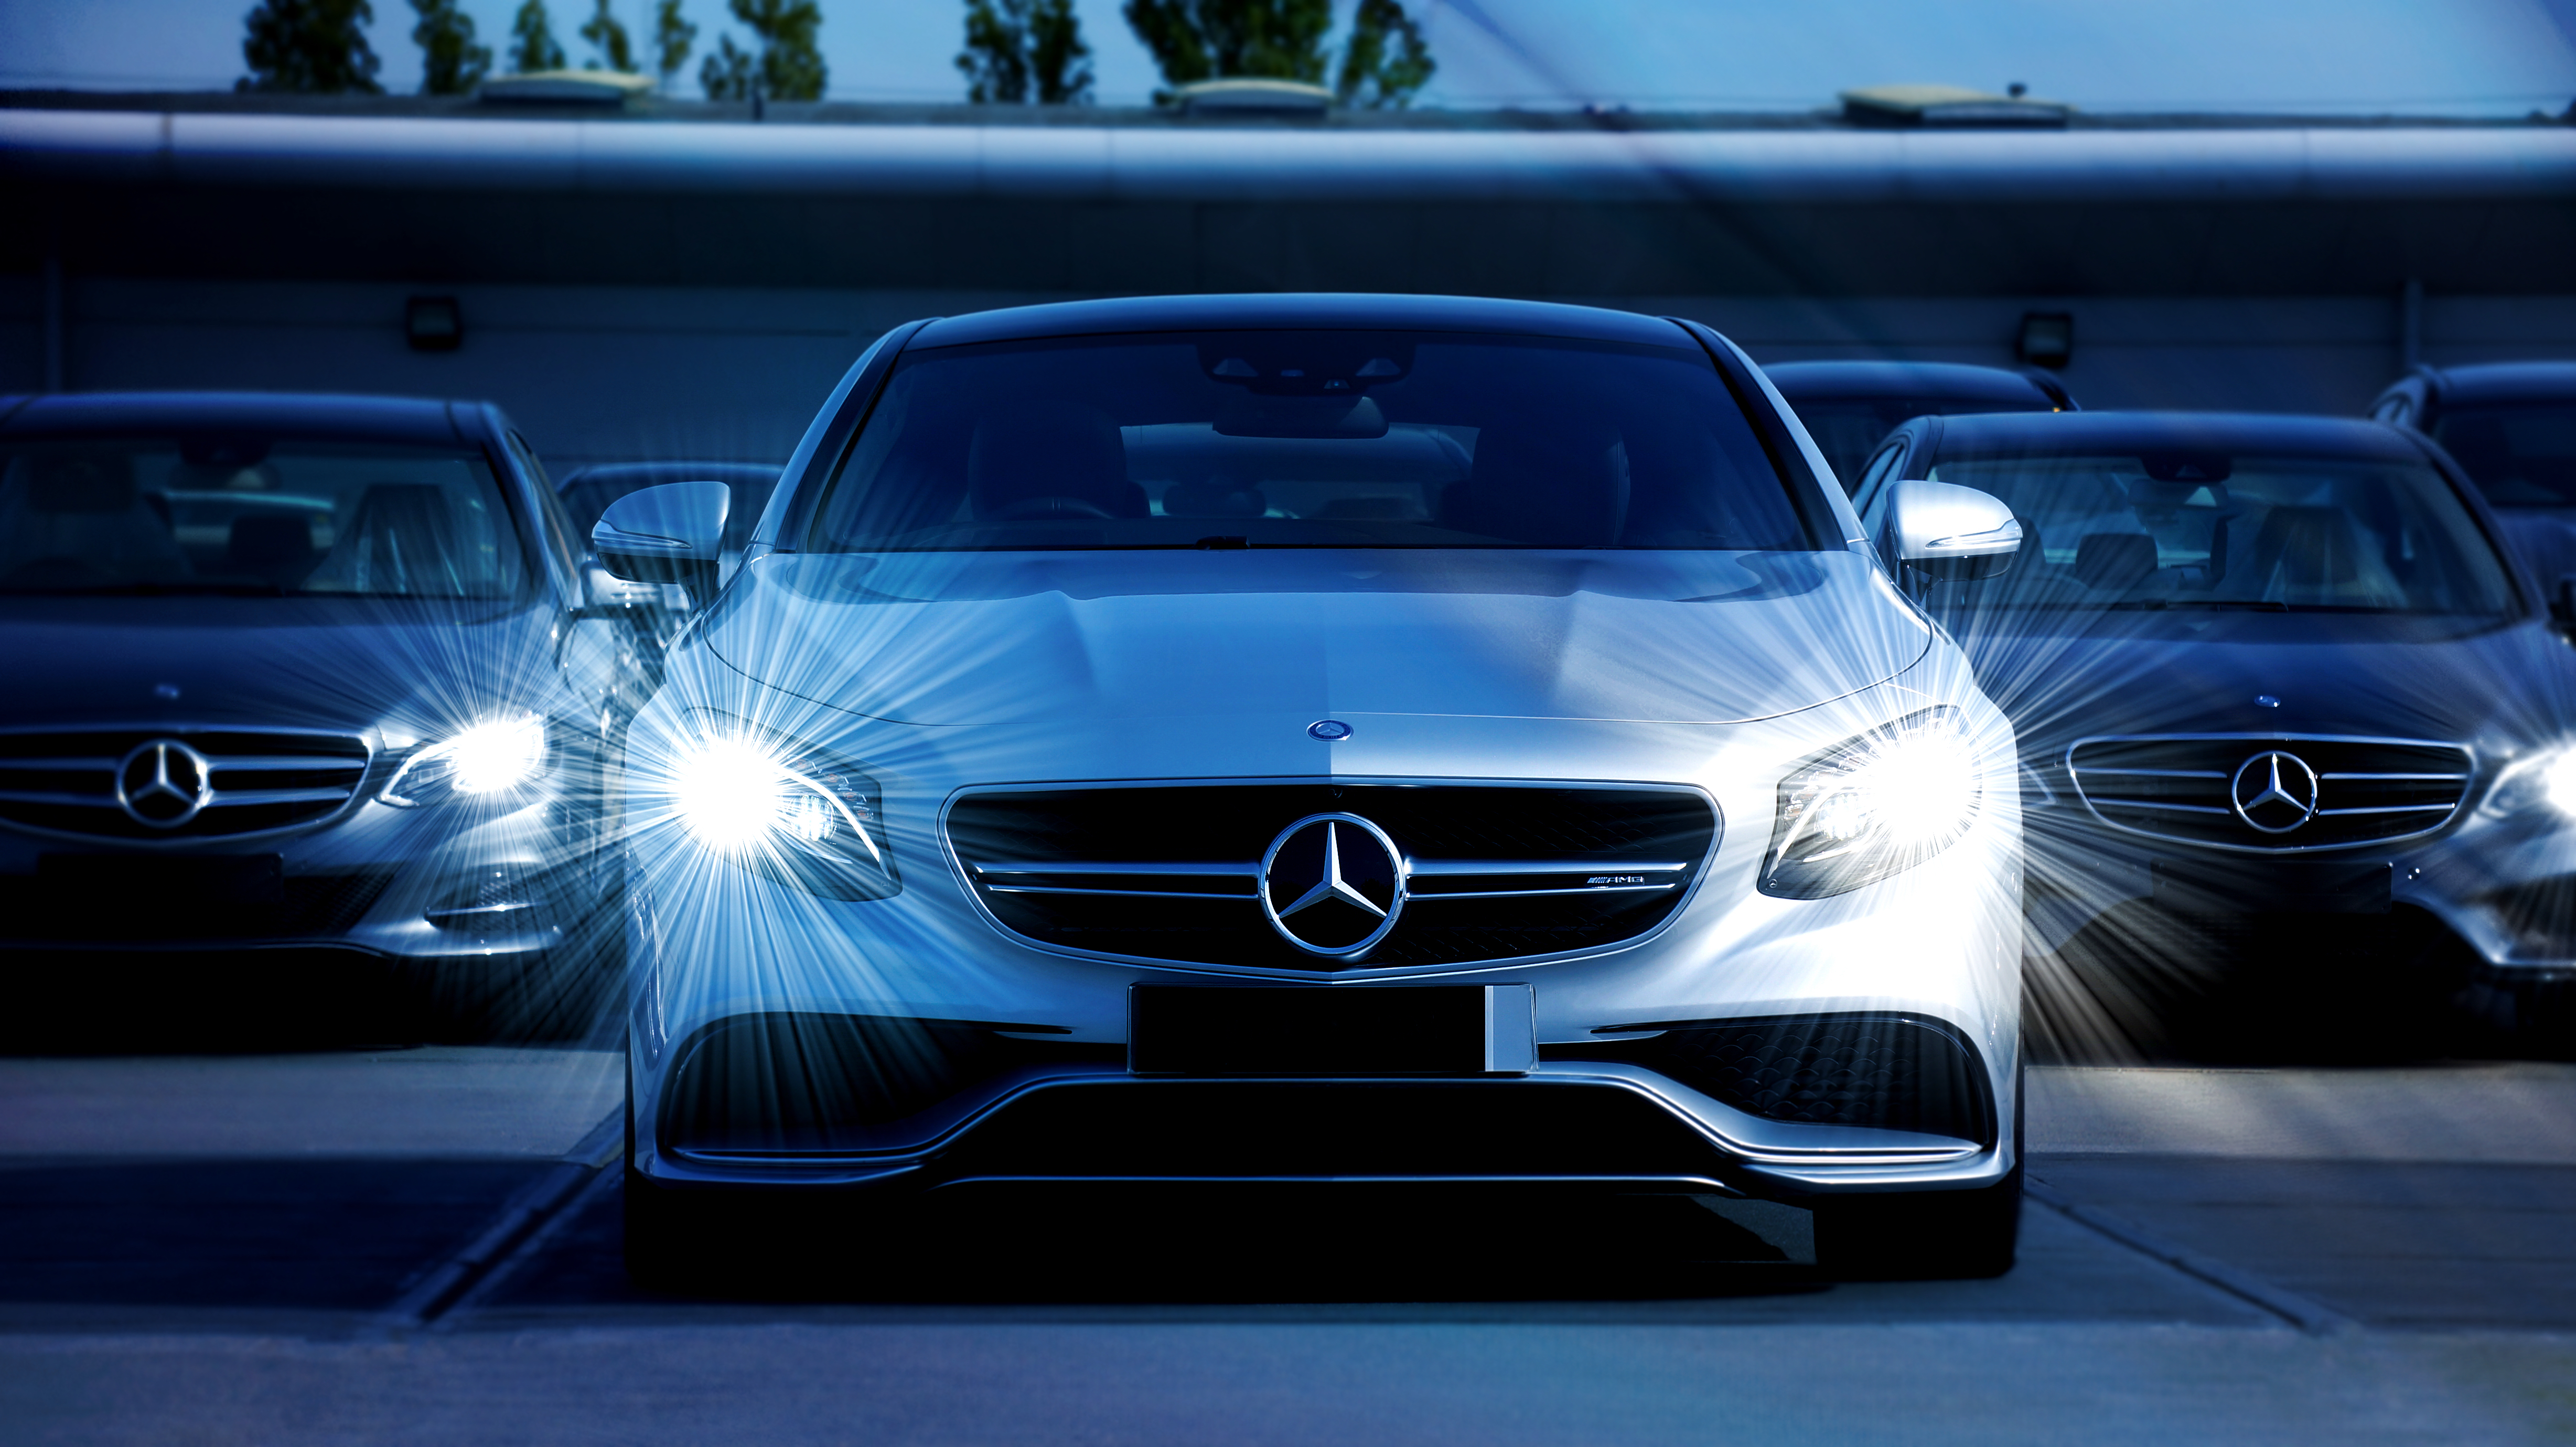 This Image Is About White Mercedes Benz Cars - Mercedes Benz - HD Wallpaper 